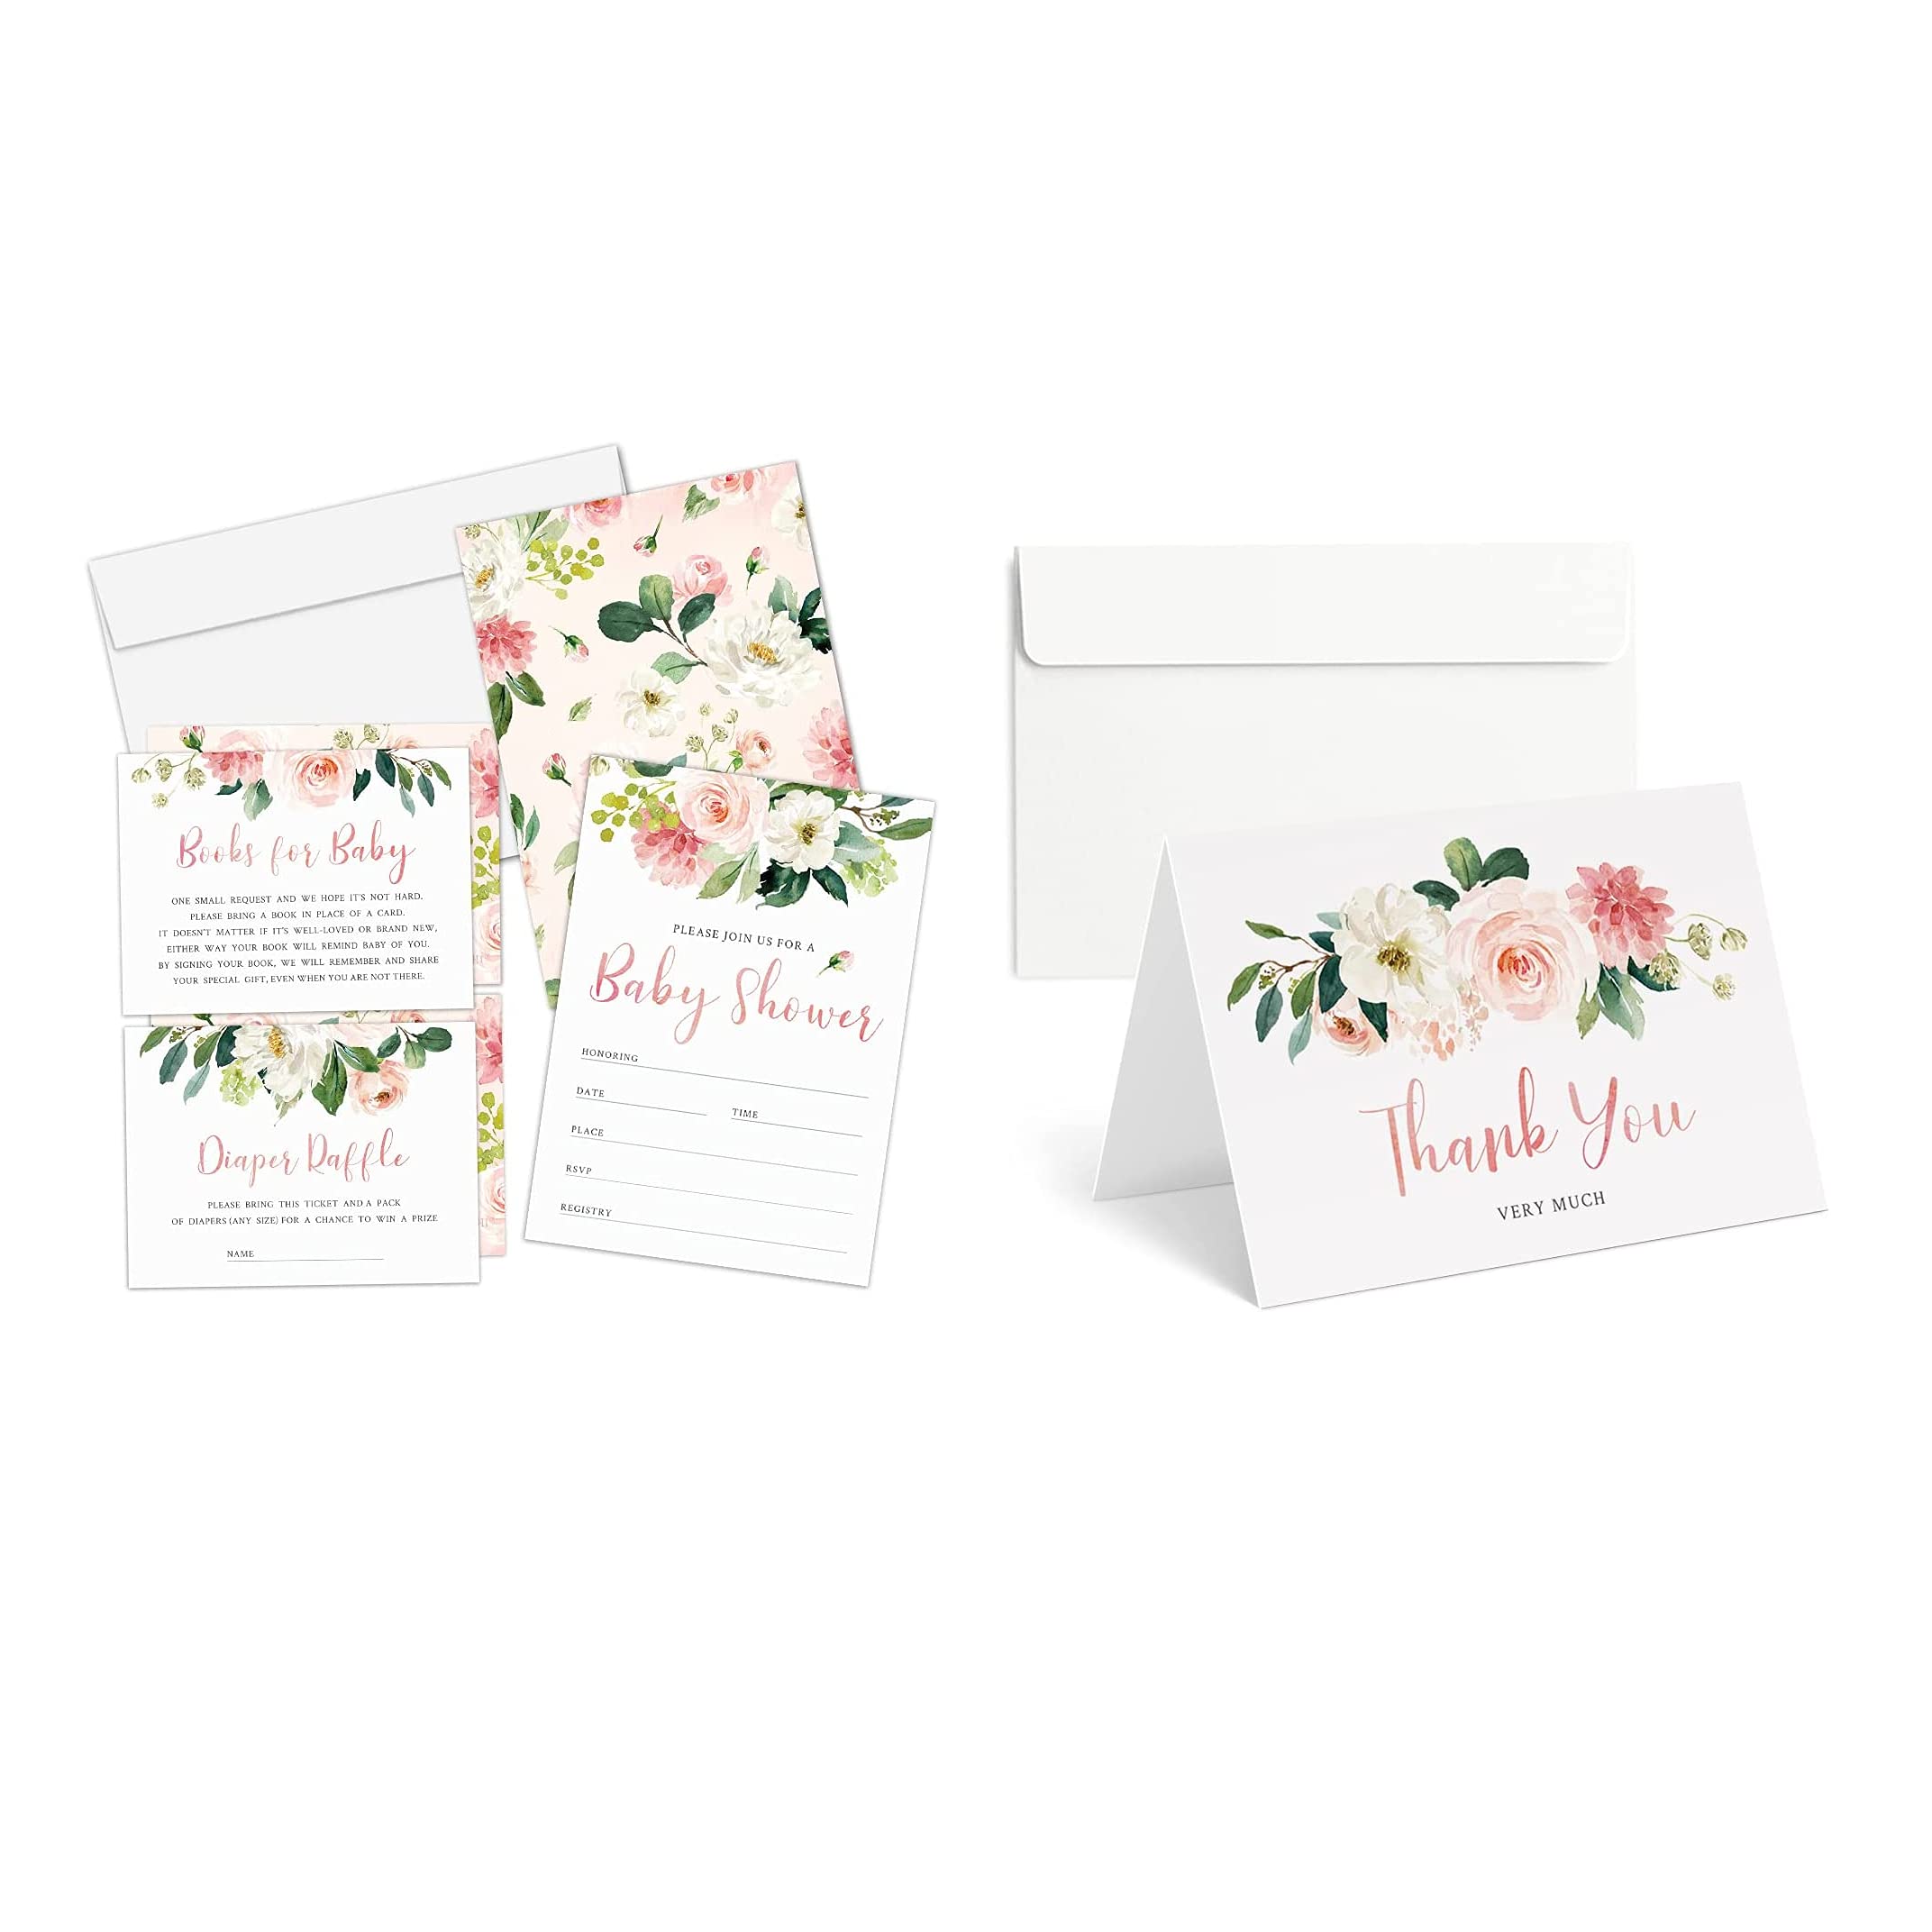 PartyGraphix Floral Baby Shower Bundle: Invitations and Thank You Cards with Envelopes, Diaper Raffle Tickets and Book Request Cards